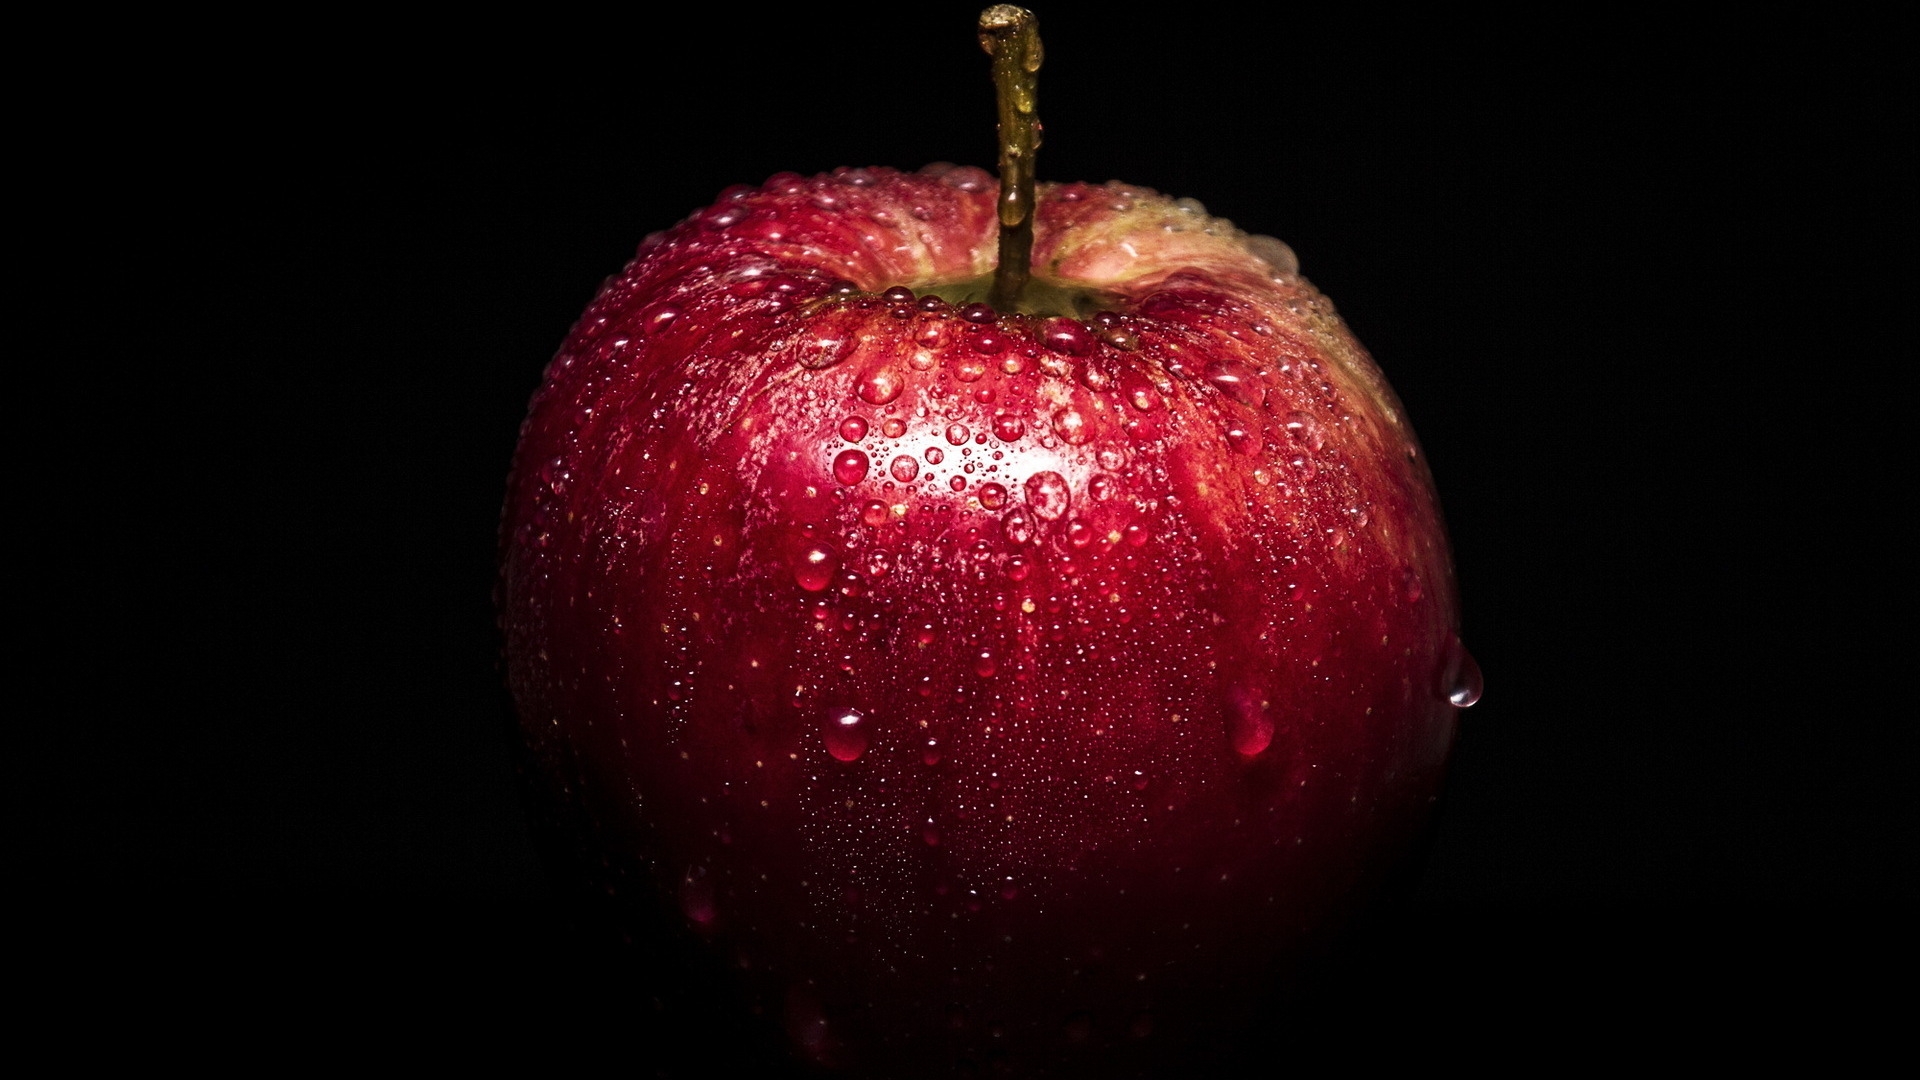 Red Delicious Apple for 1920 x 1080 HDTV 1080p resolution